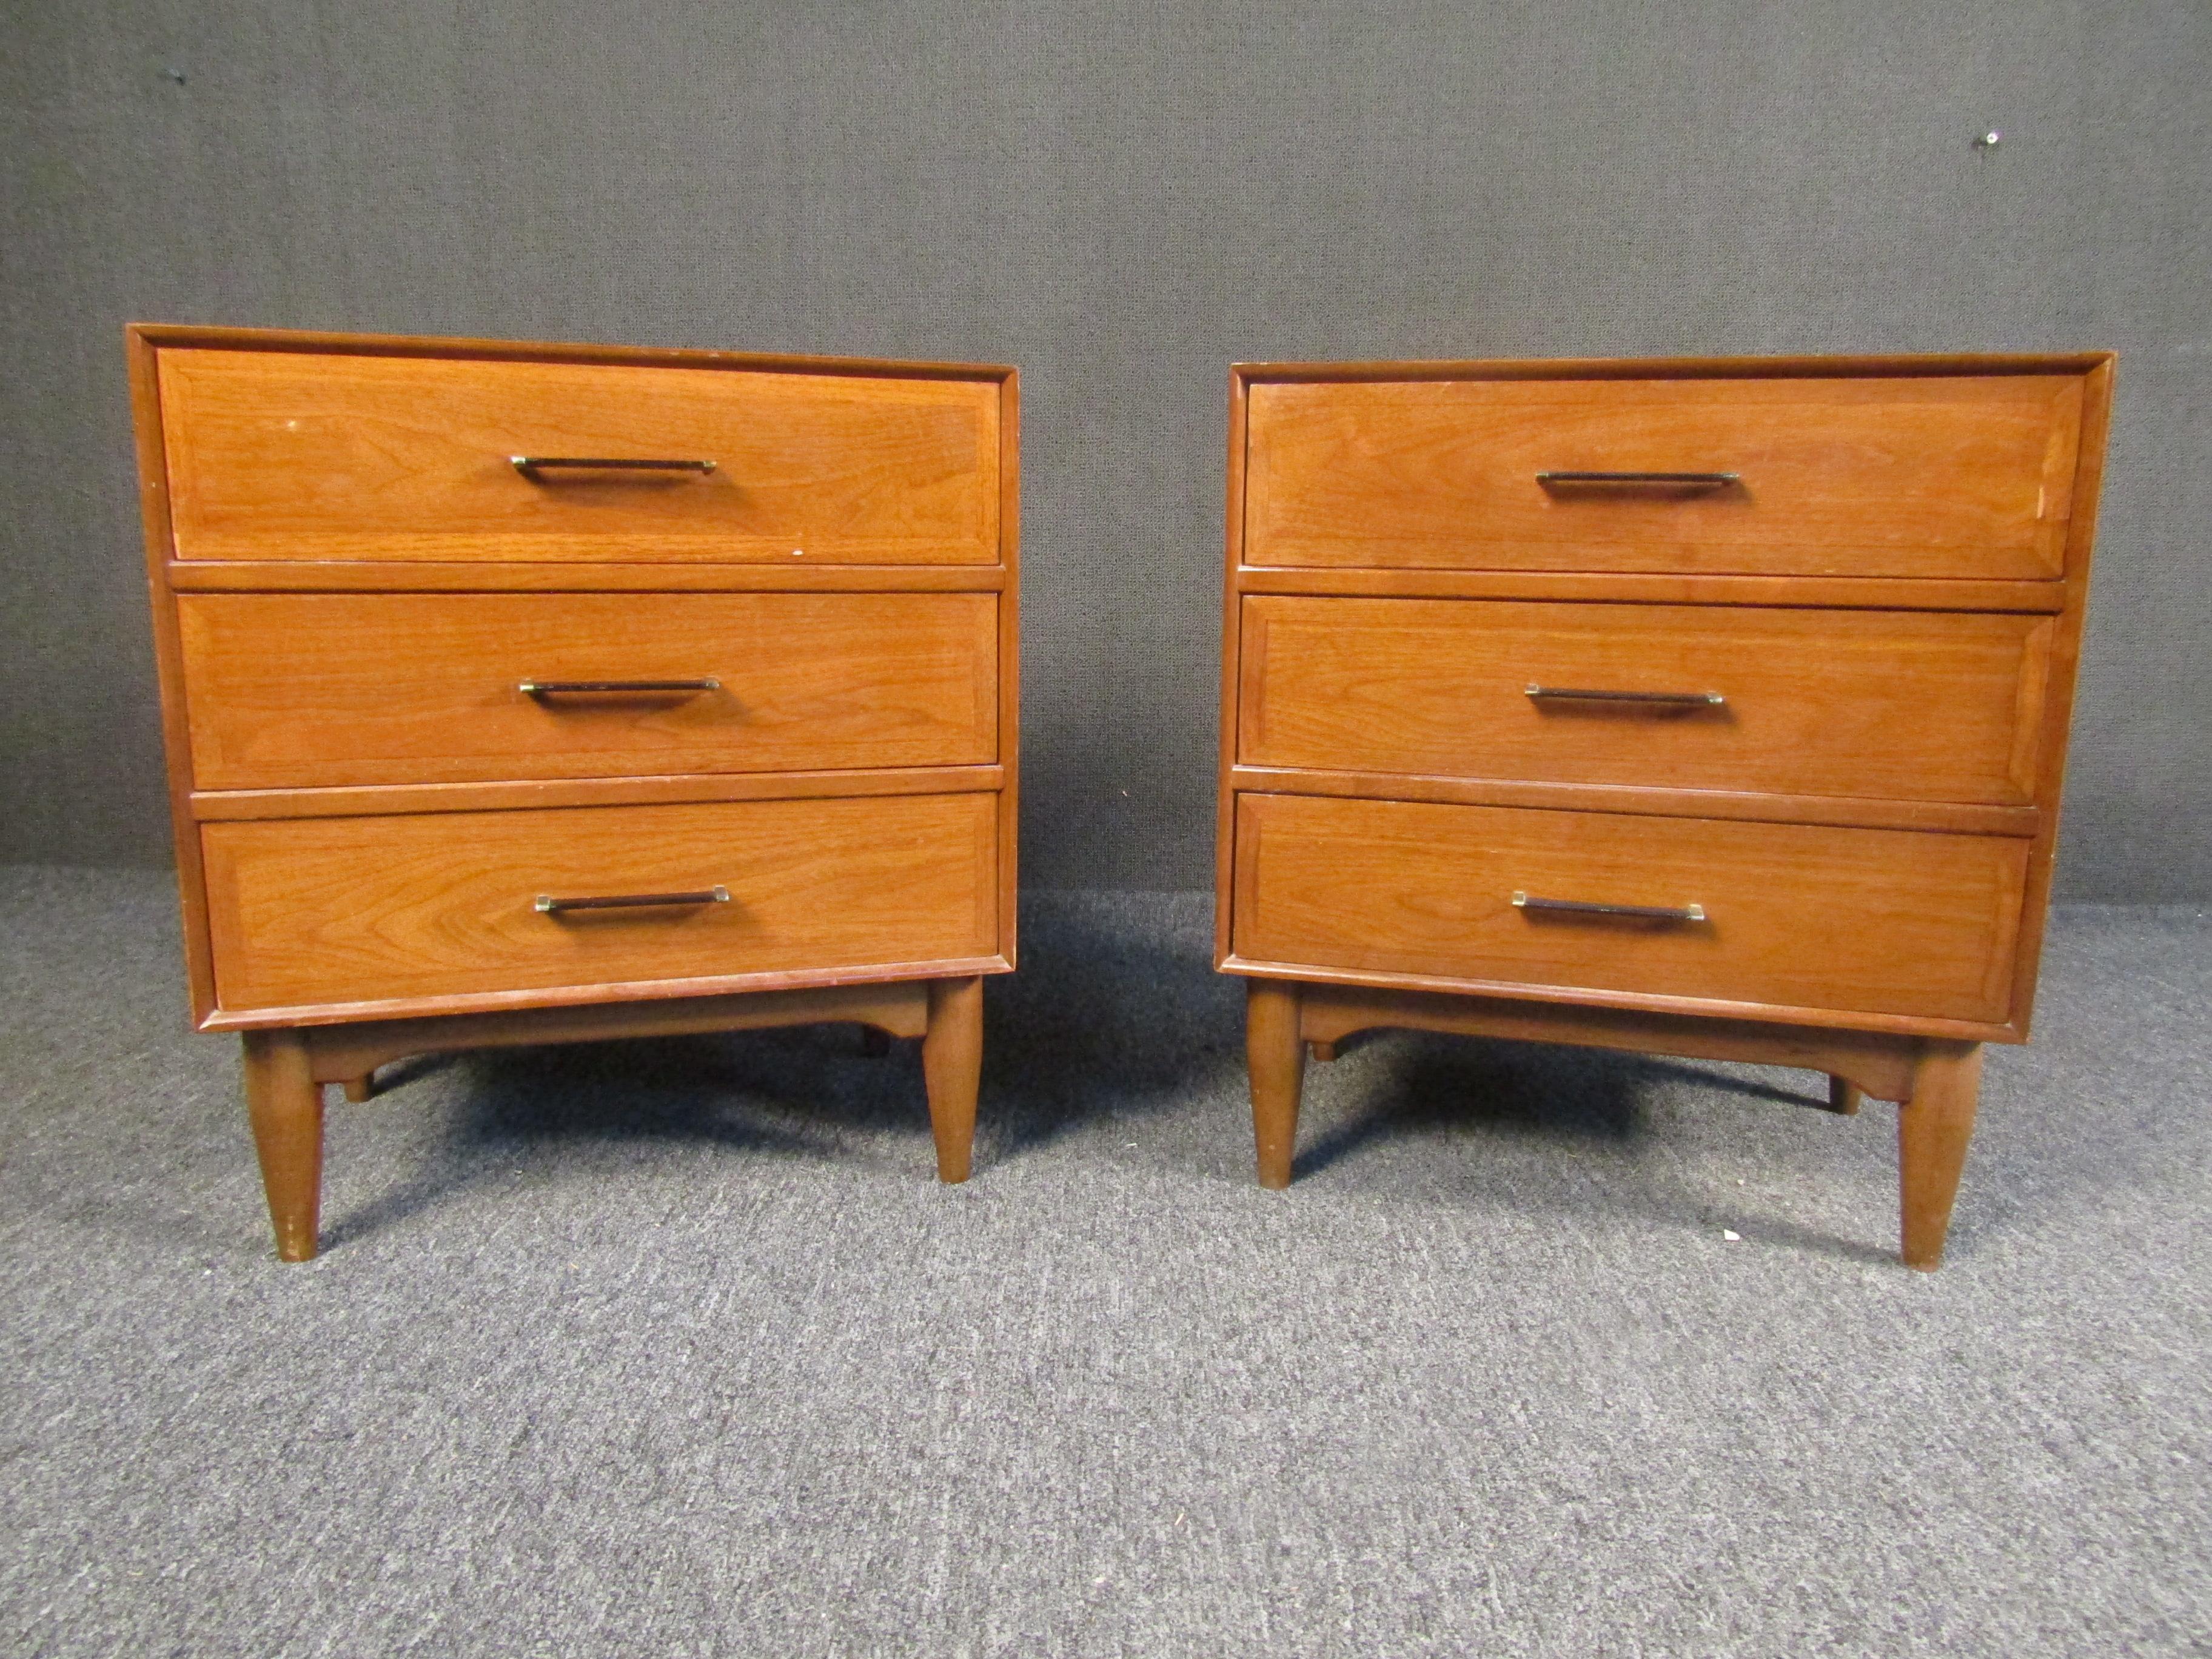 Pair of vintage walnut nightstands, perfect for adding timeless Mid-Century Modern style to a bedroom. Rich walnut is complemented by metal handles and sculpted legs. Please confirm item location with seller (NY/NJ).